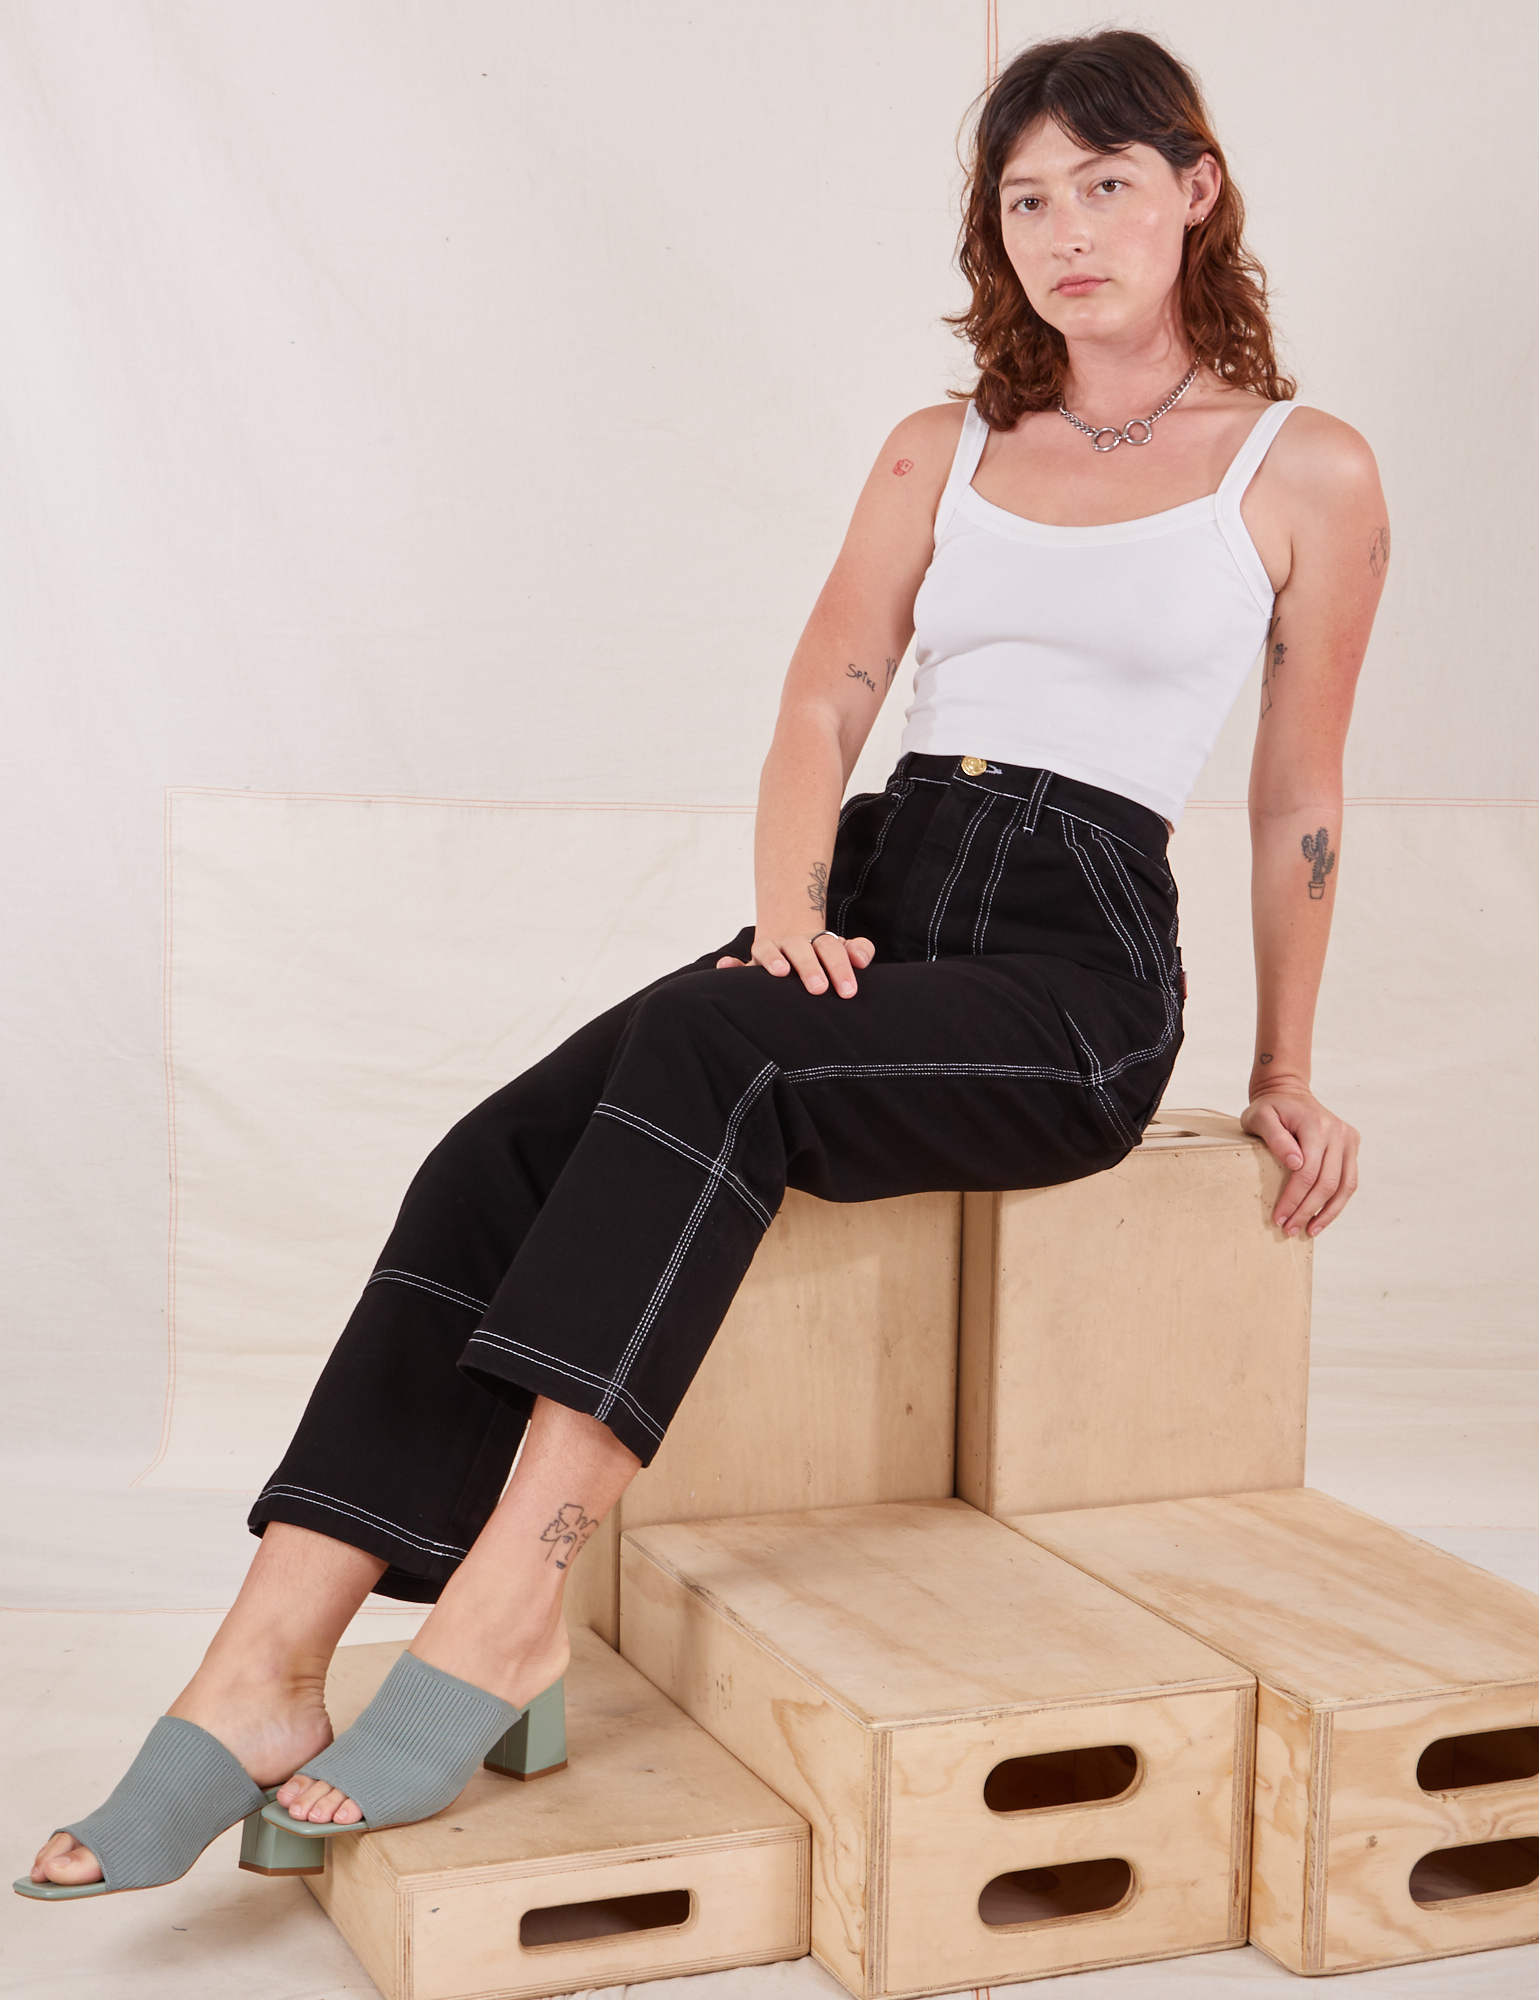 Alex is wearing Carpenter Jeans in Black and vintage off-white Cami